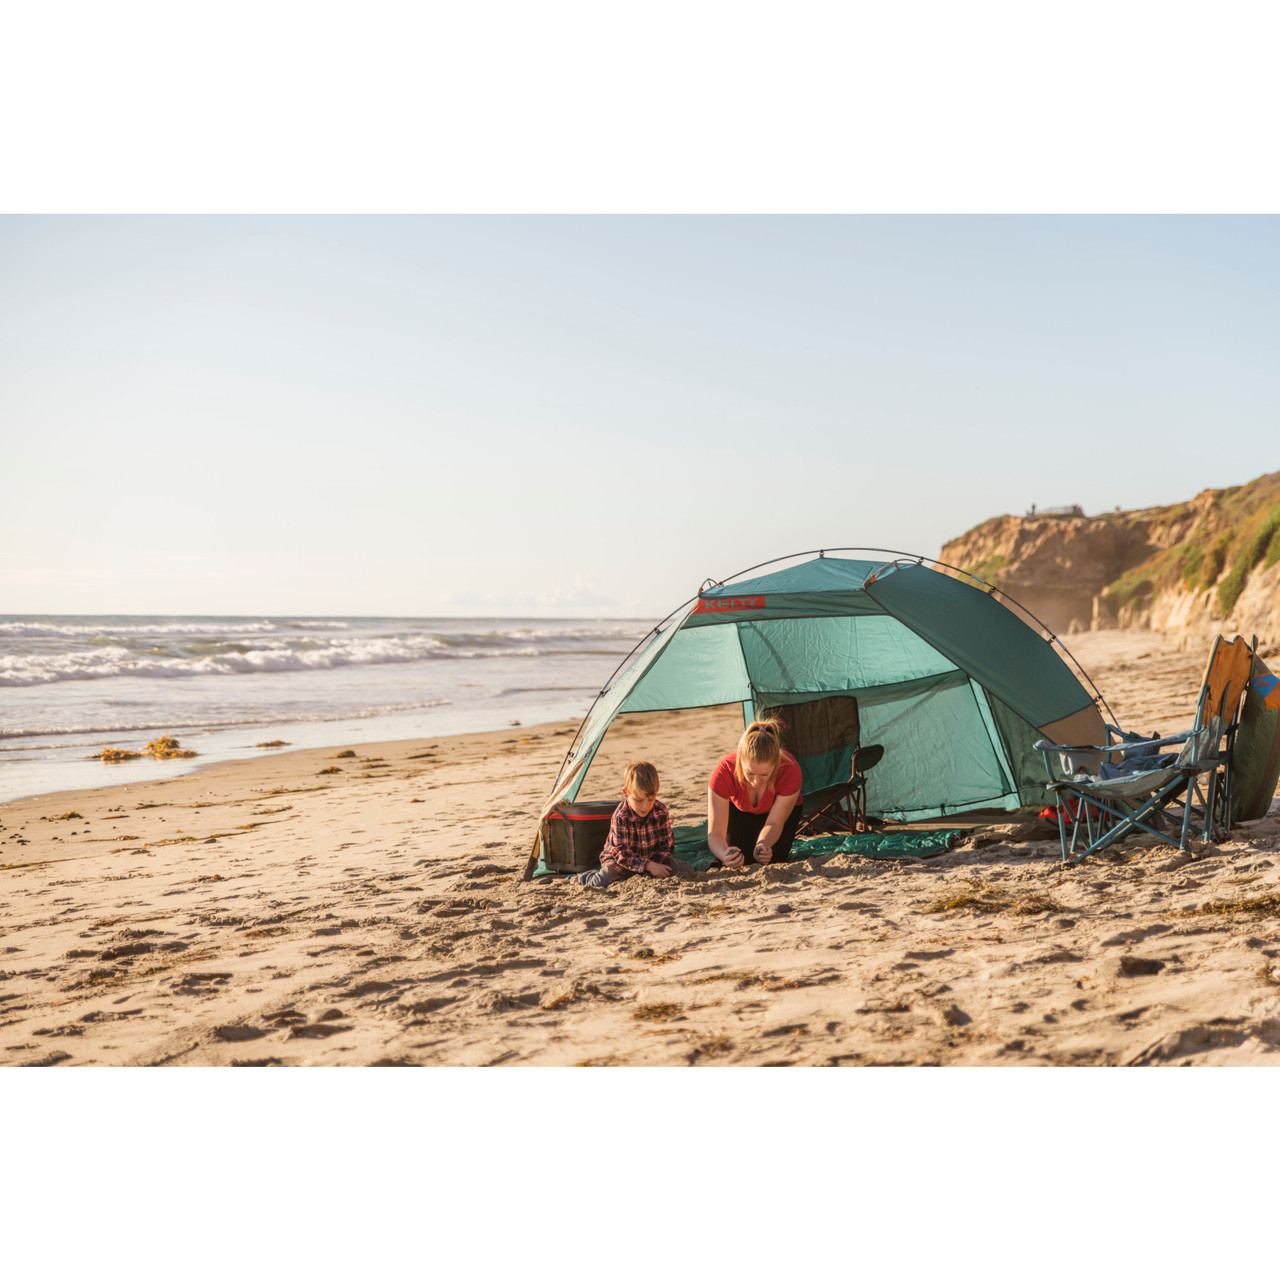 Cabana Shelter For Privacy & Comfort All Day | Kelty